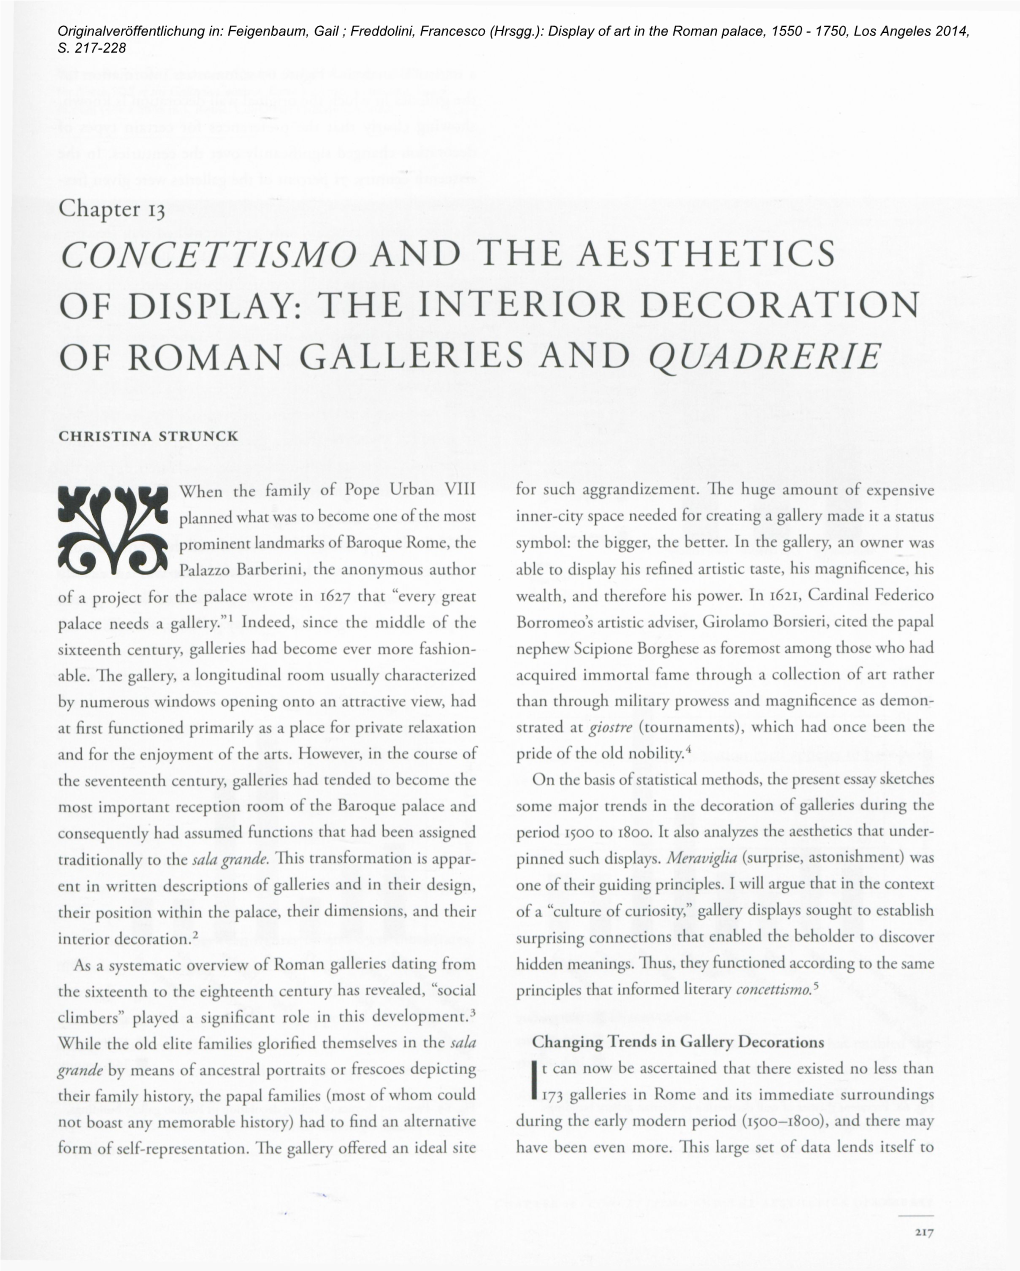 Concettismo and the Aesthetics of Display: the Interior Decoration of Roman Galleries and Quadrerie